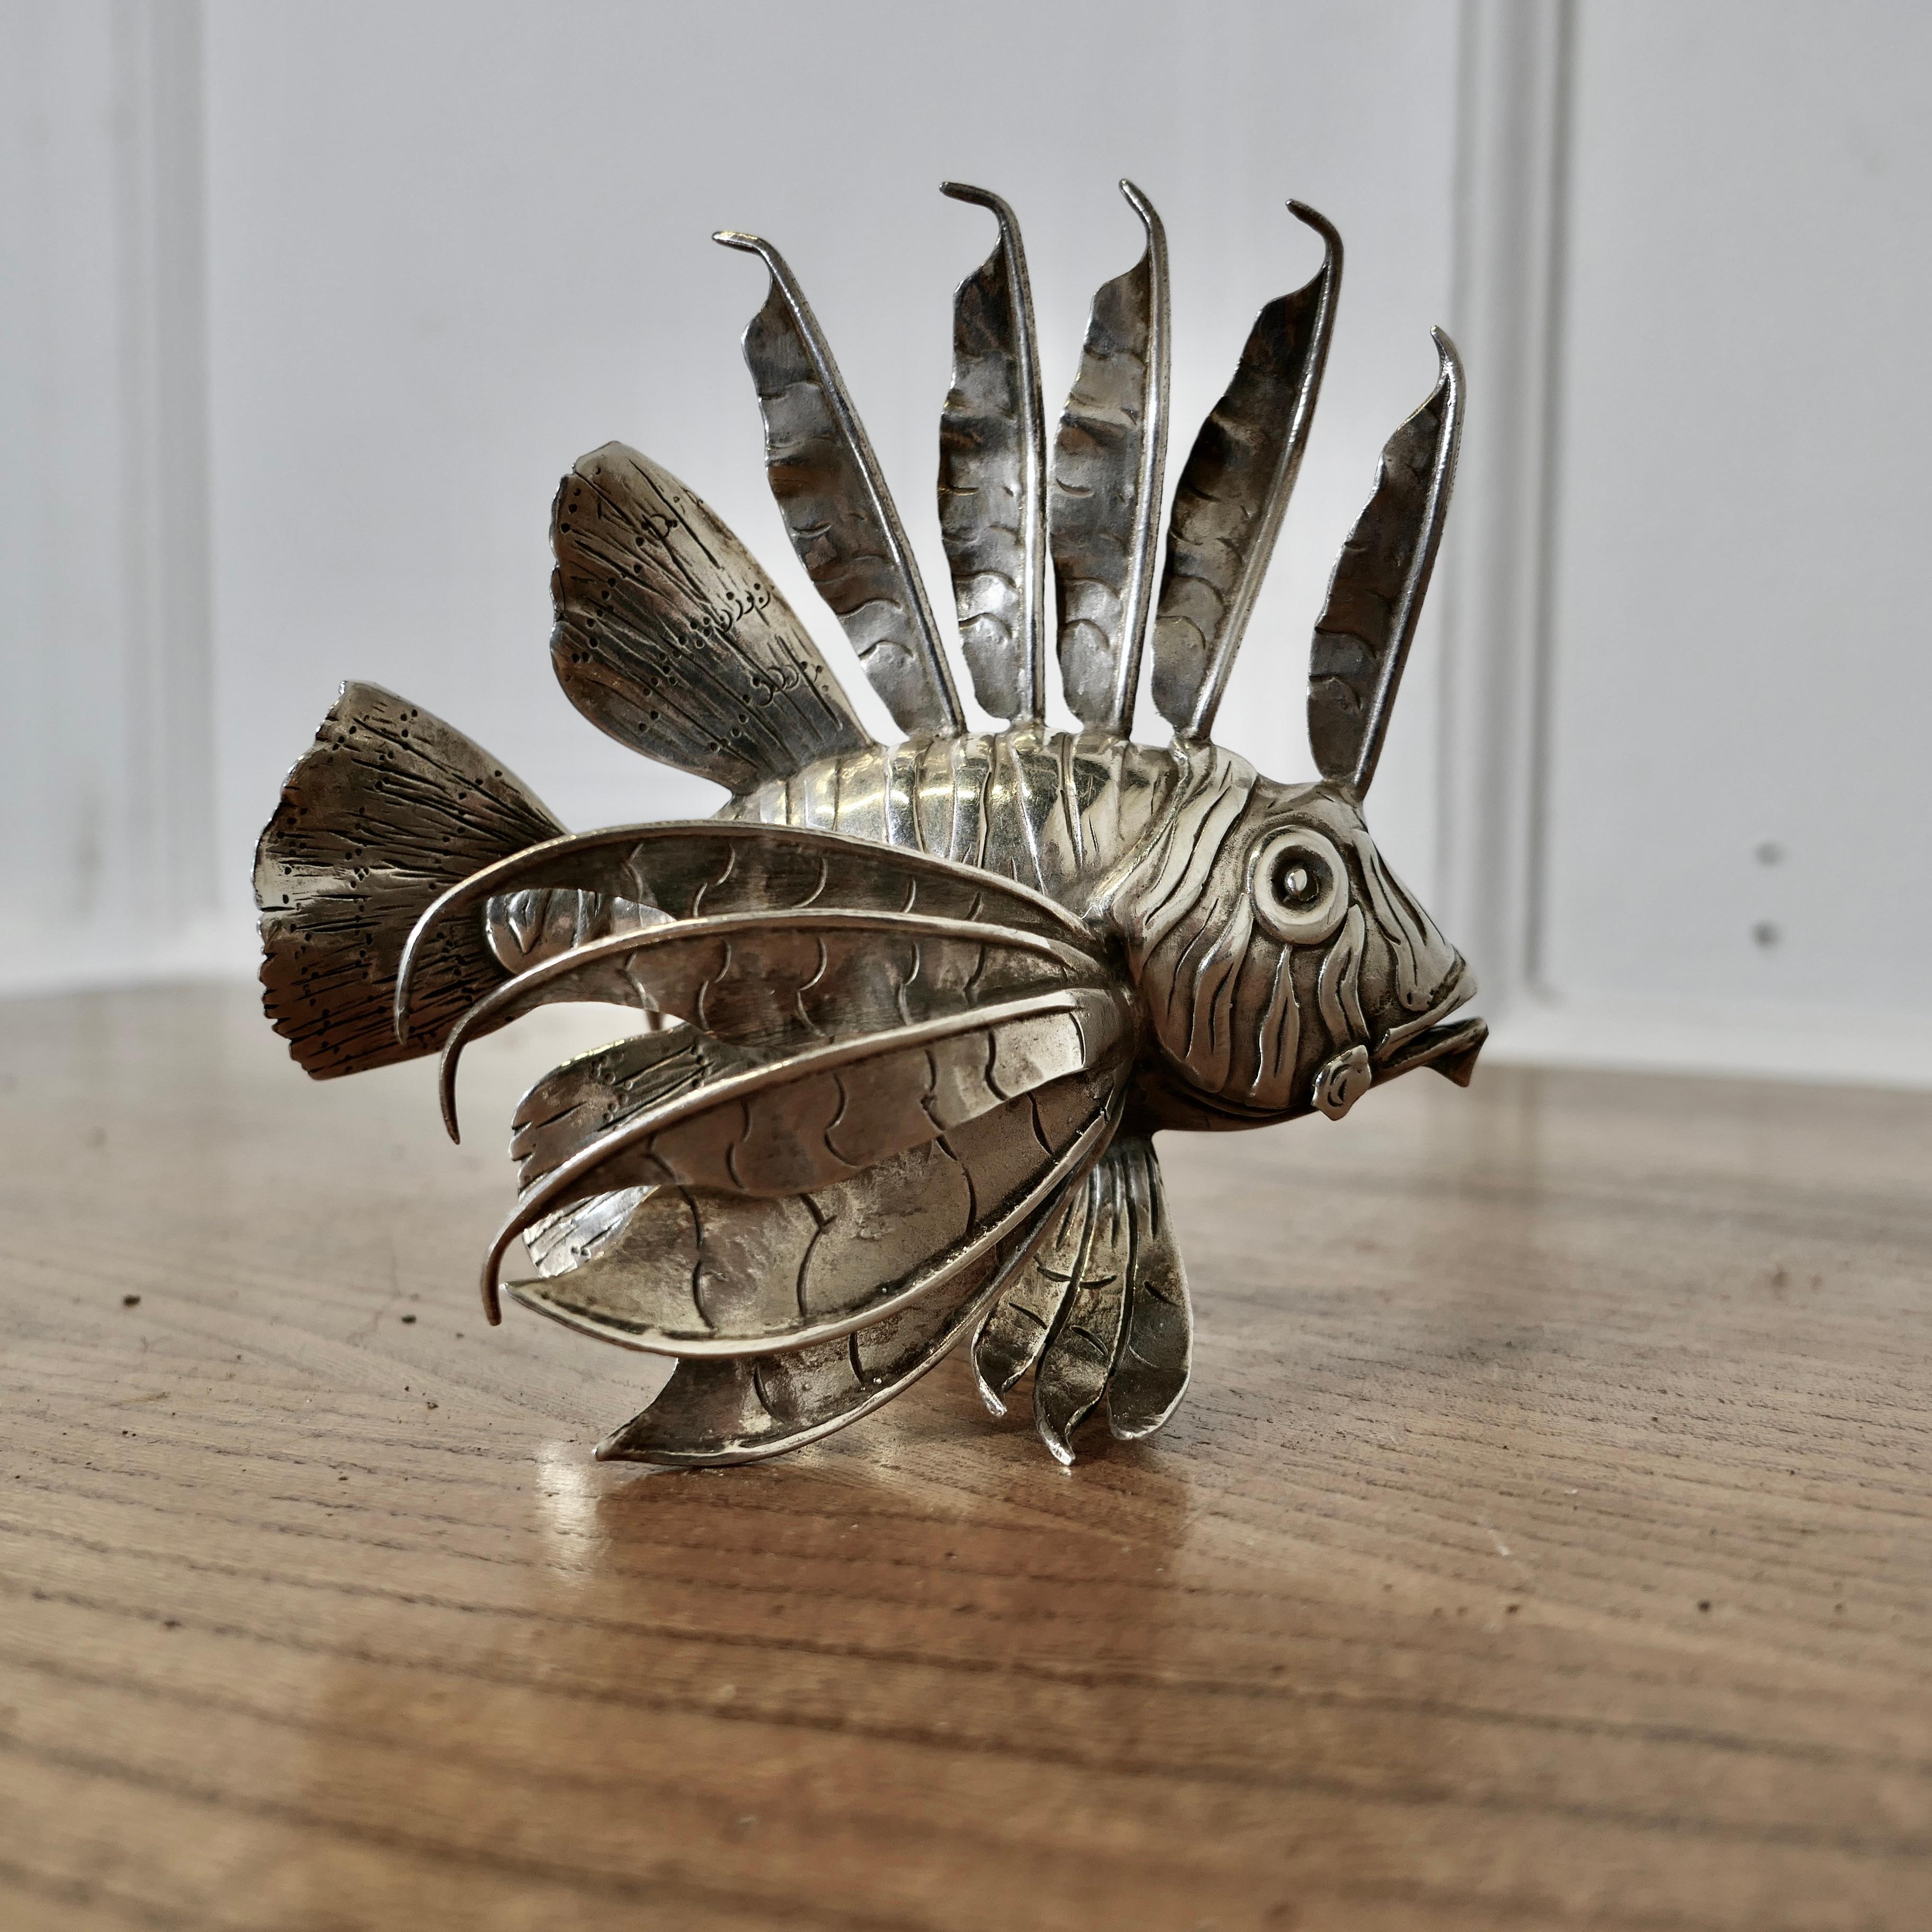 Silver Lion Fish Model Signed by  Mario Bucellati

A fine piece from one of the most prestigious jewellers of the world, this realistic freestanding model is made by and signed Mario Bucellati
The Fish is 4.5” in height and length and 3.5”